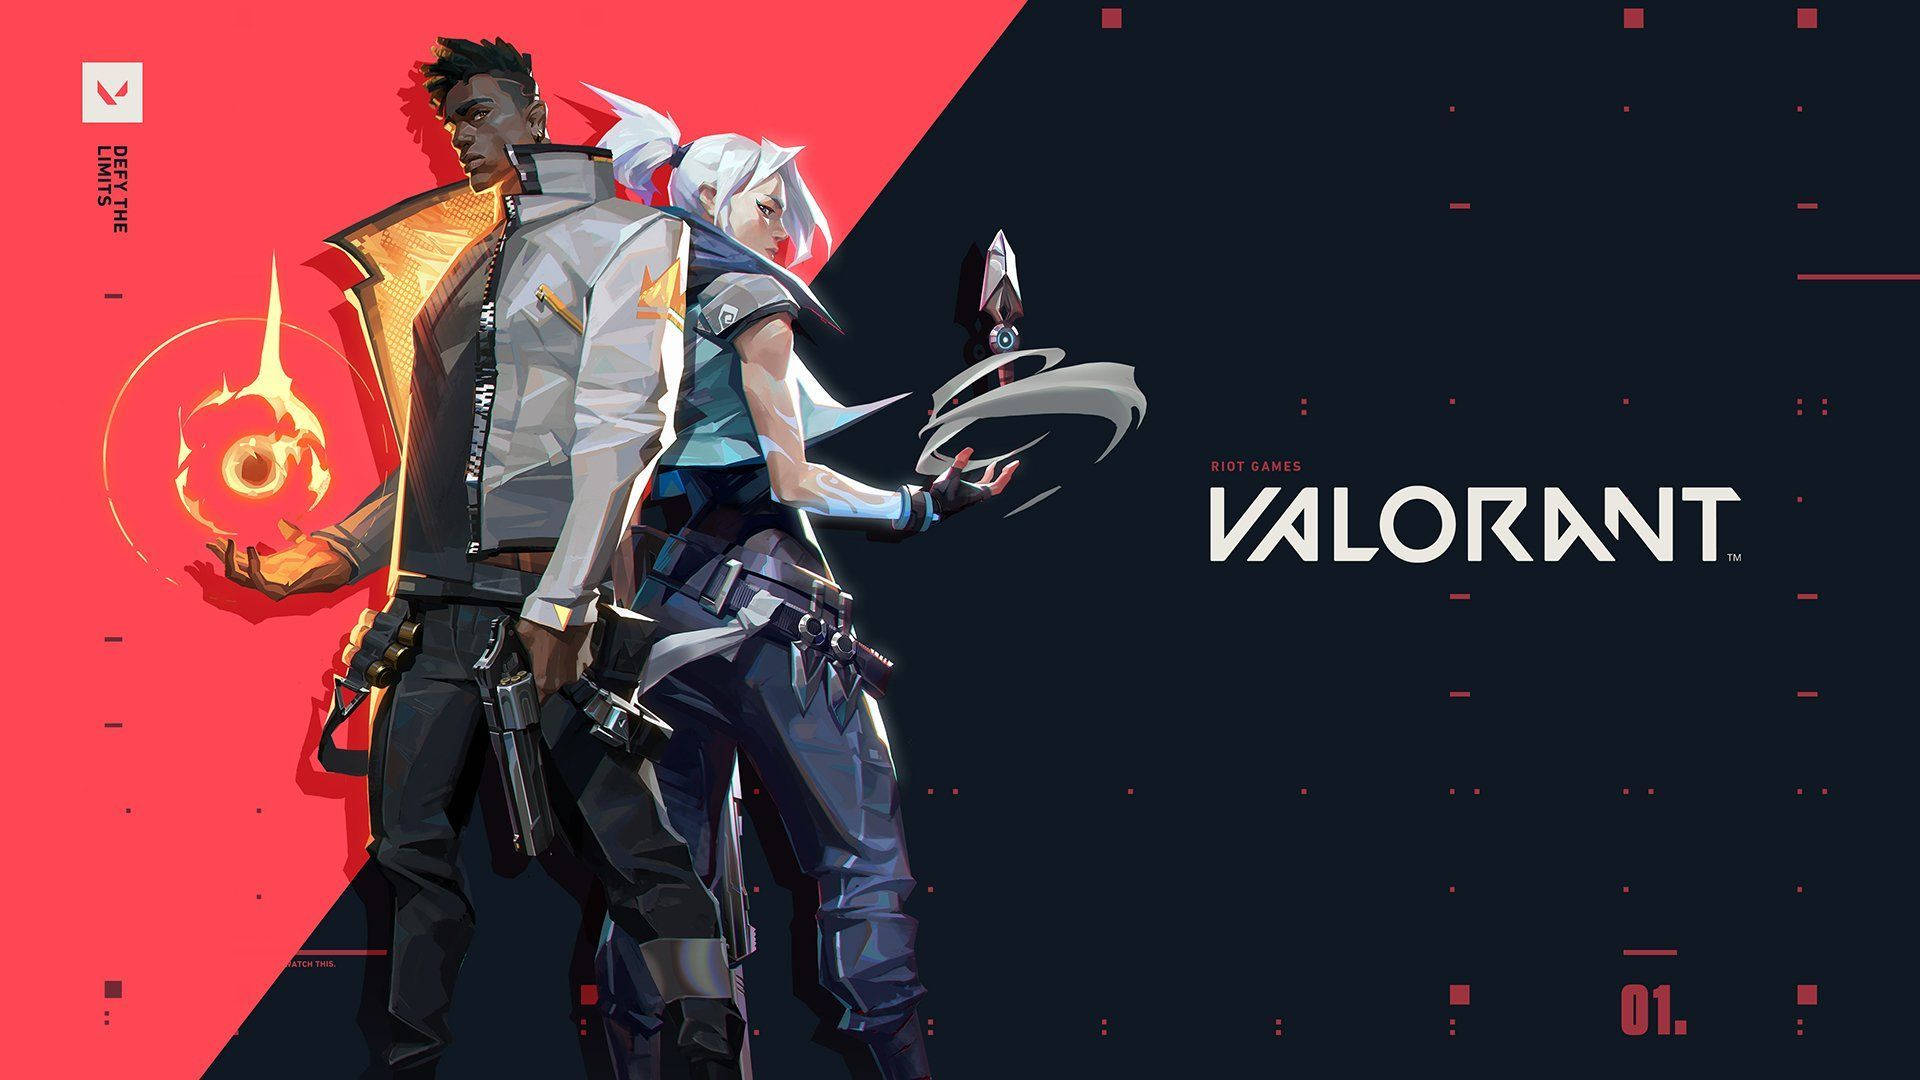 Captivating Valorant gameplay on a Computer Screen Wallpaper